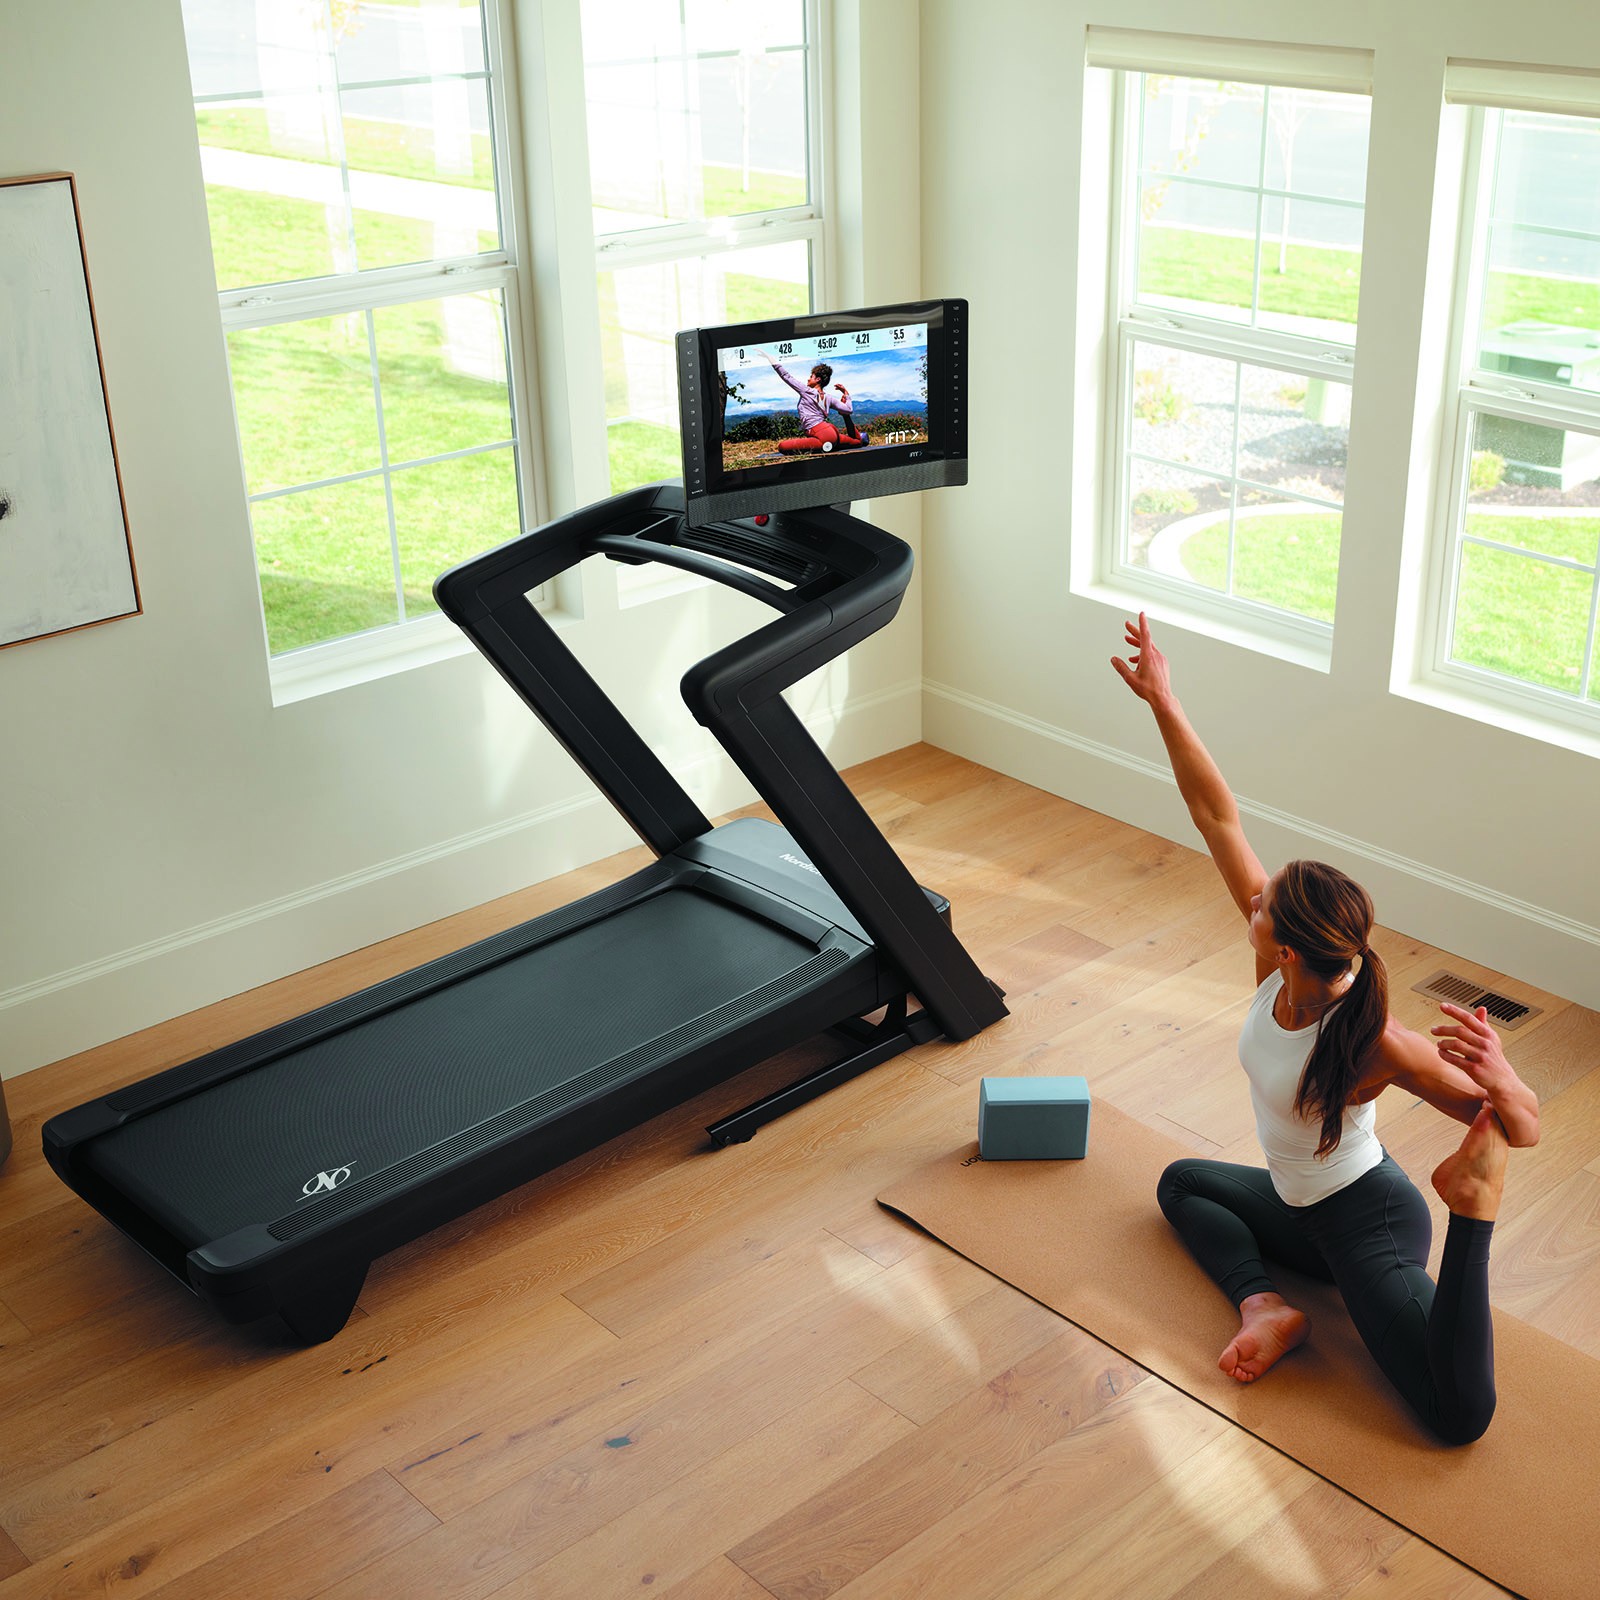 NordicTrack 2450Treadmill – iFIT in use yoga